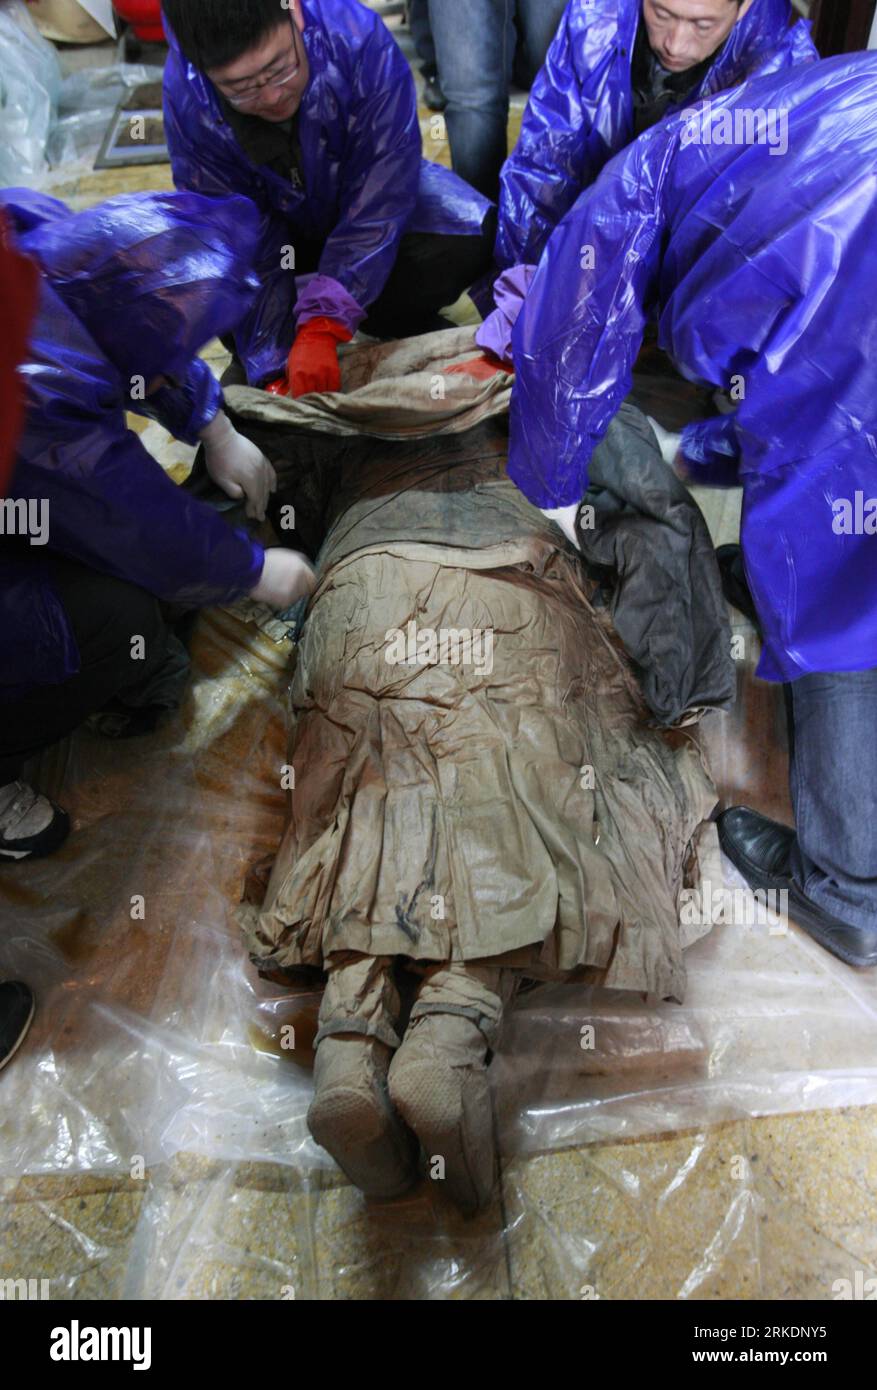 Bildnummer: 54980692  Datum: 01.03.2011  Copyright: imago/Xinhua (110304) -- TAIZHOU, March 4, 2011 (Xinhua) -- Museum staff members clean up an unrotten female corpse of the Ming dynasty (1368-1644) unearthed in Taizhou of east China s Jiangsu Province, March 3, 2011. The well-preserved female corpse was found on March 1 in one of the three Ming dyansty coffins excavated in Taizhou on Feb. 28. The 1.5 meter-long stiff corpse, tightly wrapped in cerecloth, quilt and clothes, has complete skin and clearly recognizable facial features, hair and even eyelashes. After more cleanup work on Thursday Stock Photo